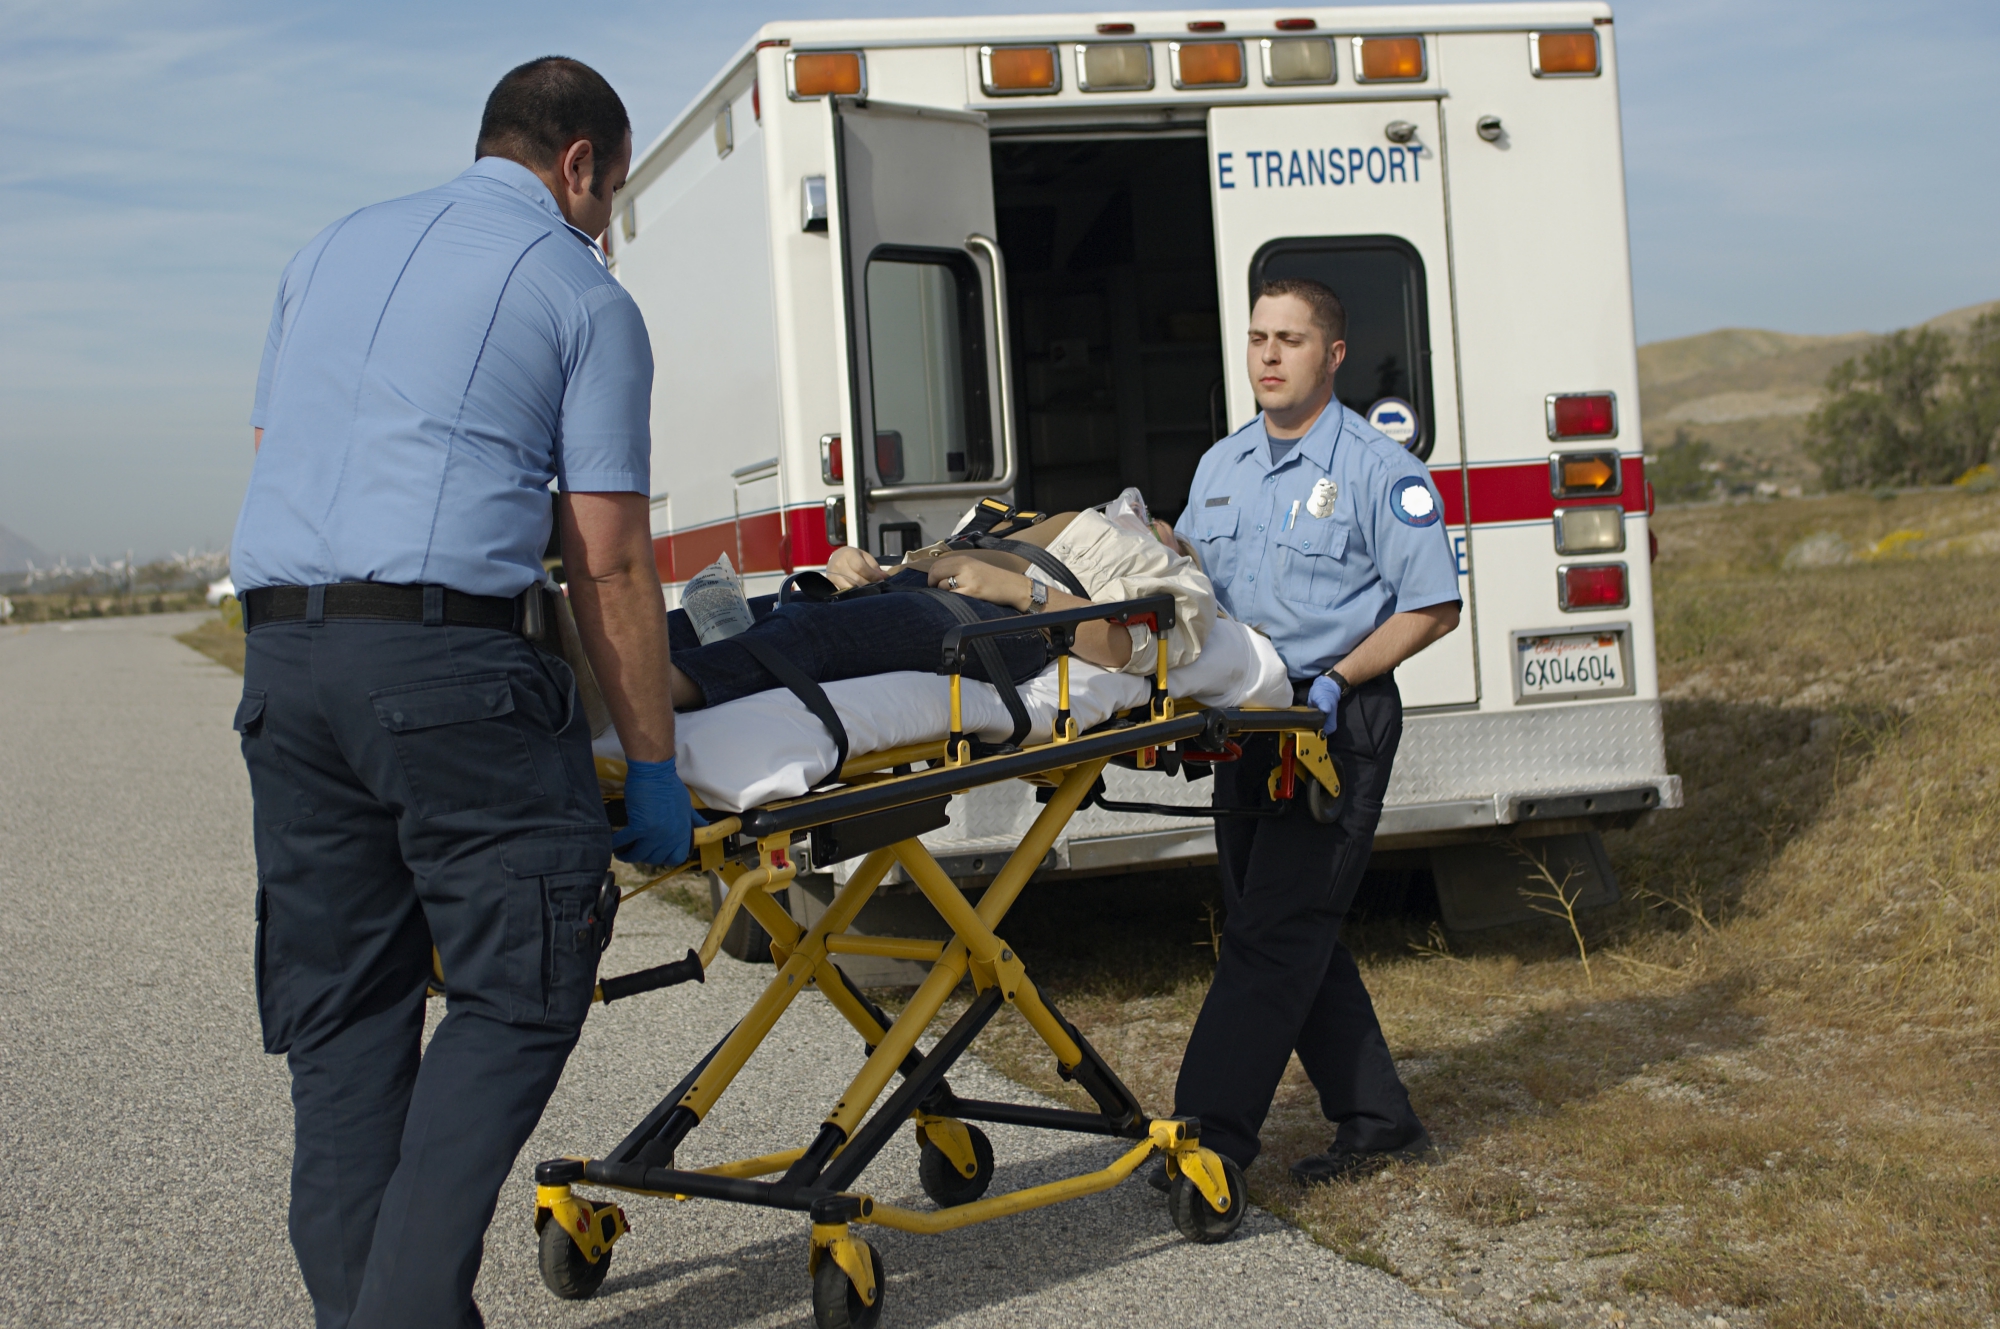 10 Best Online Paramedic to RN Programs for 2020 - Top RN to BSN